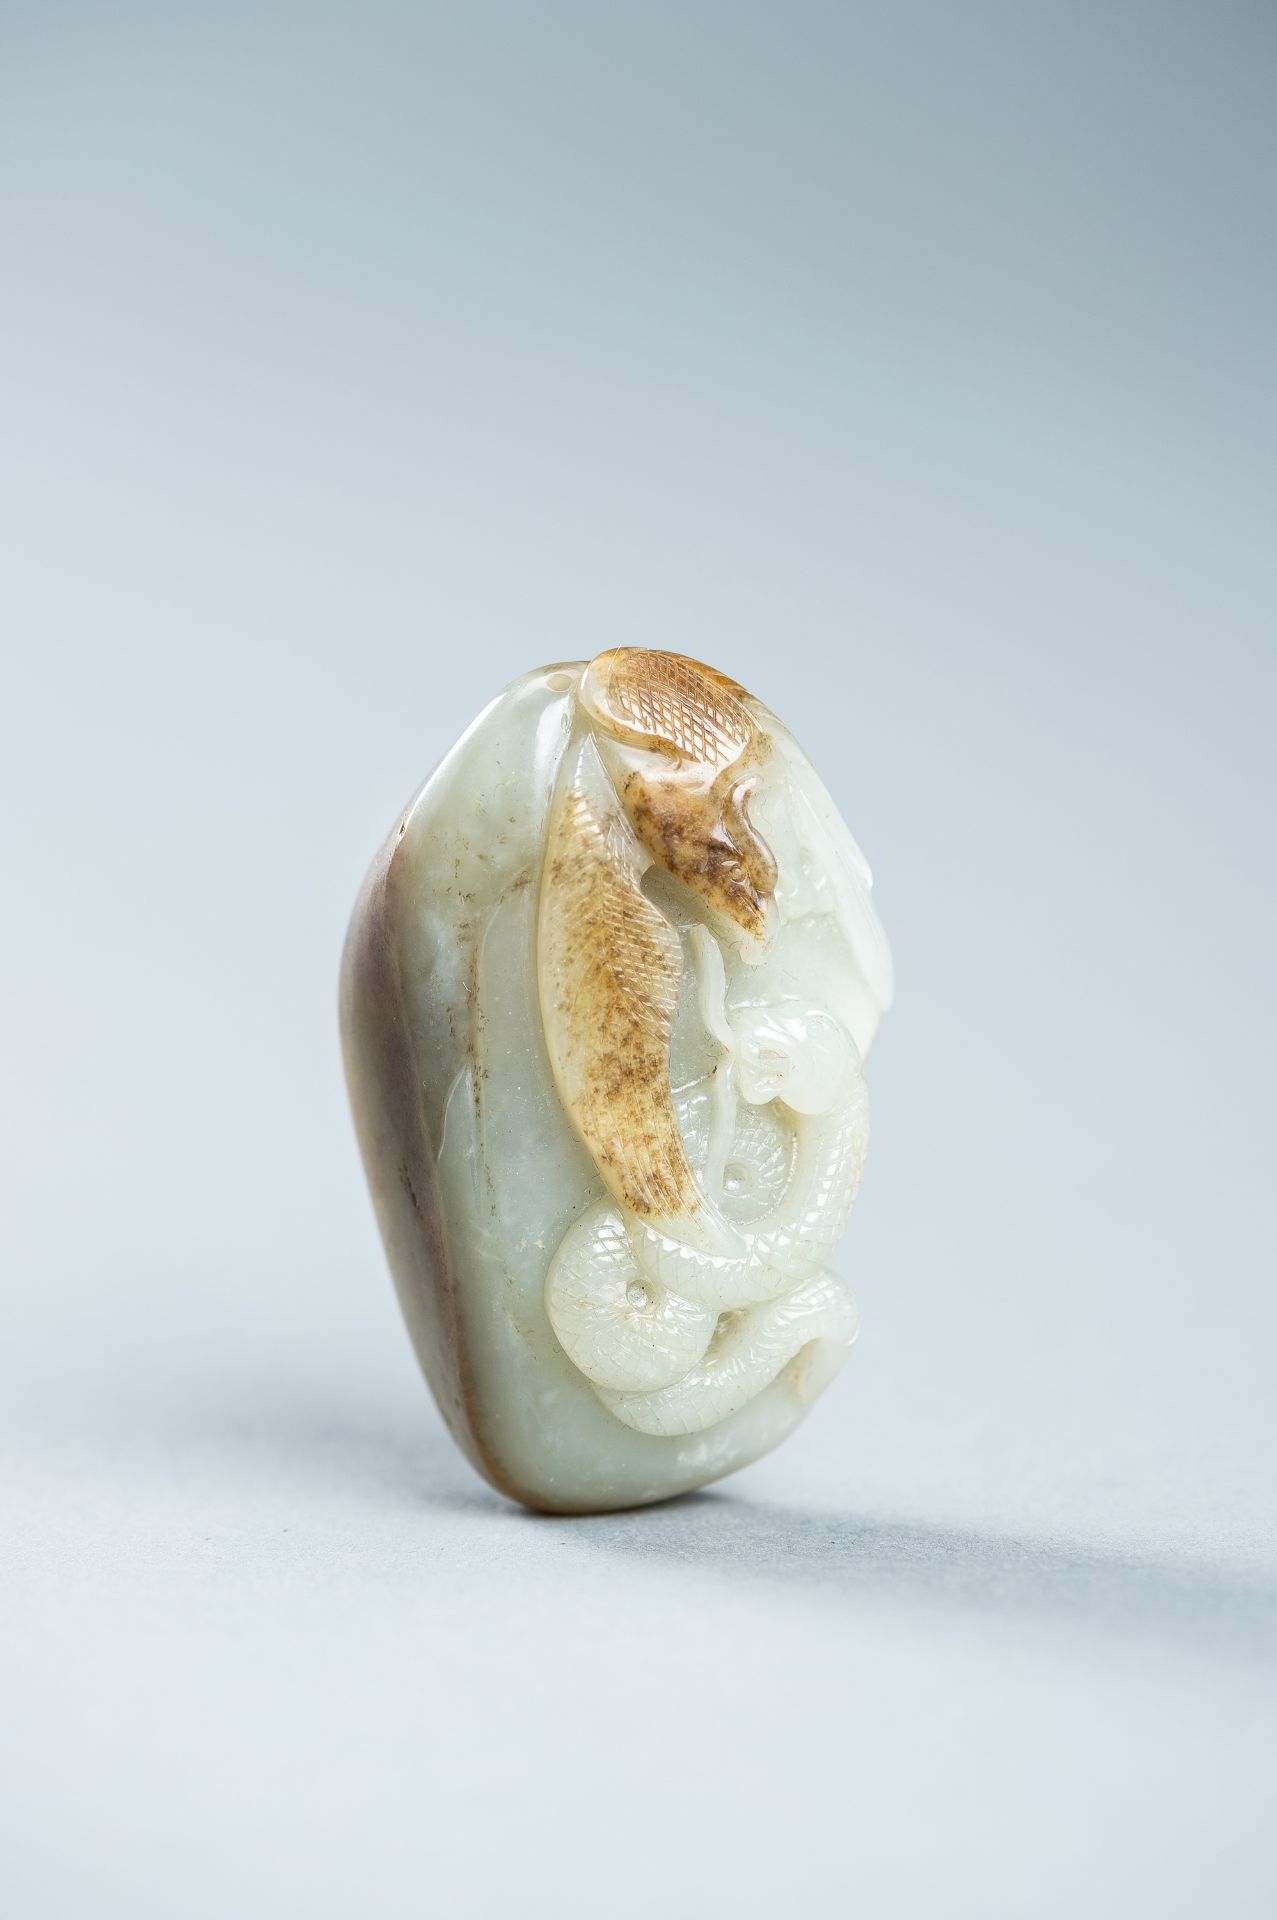 A CELADON AND RUSSET JADE 'EAGLE AND SNAKE' PENDANT, c. 1920s - Image 3 of 9